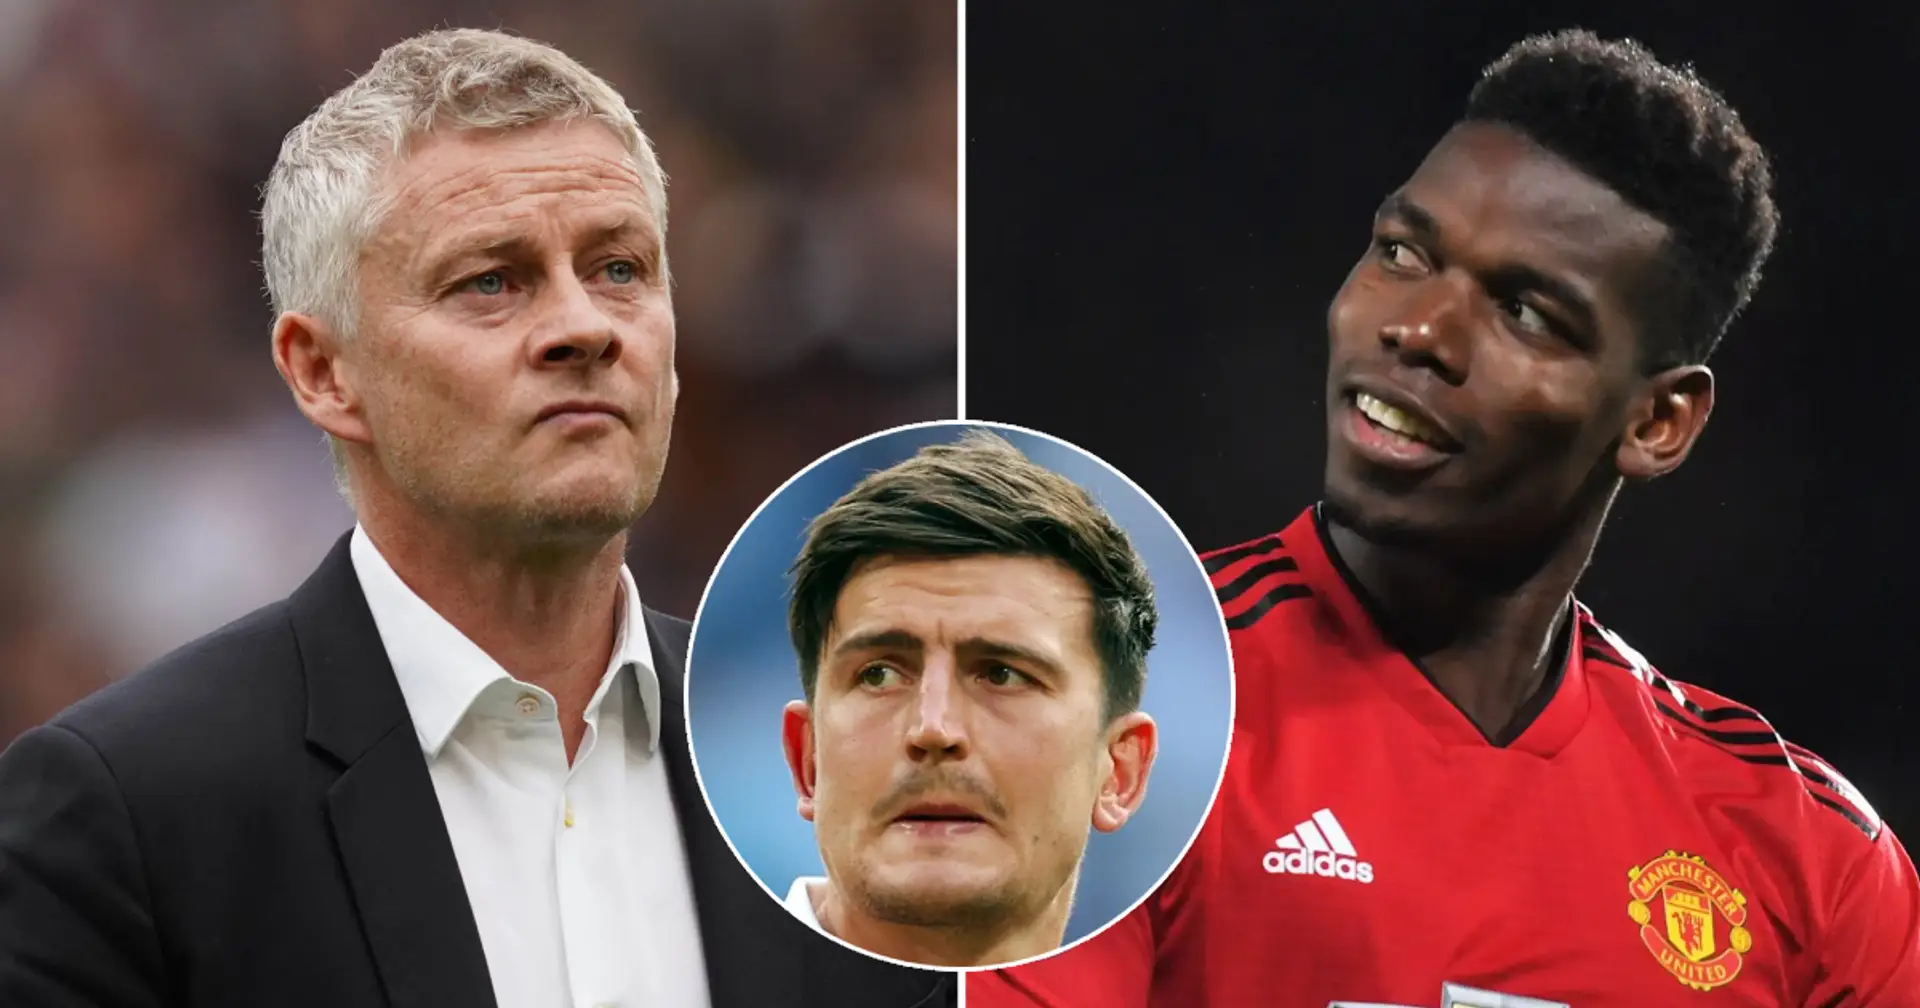 2 players turned down captaincy under Ole & 2 more under-radar stories at Man United